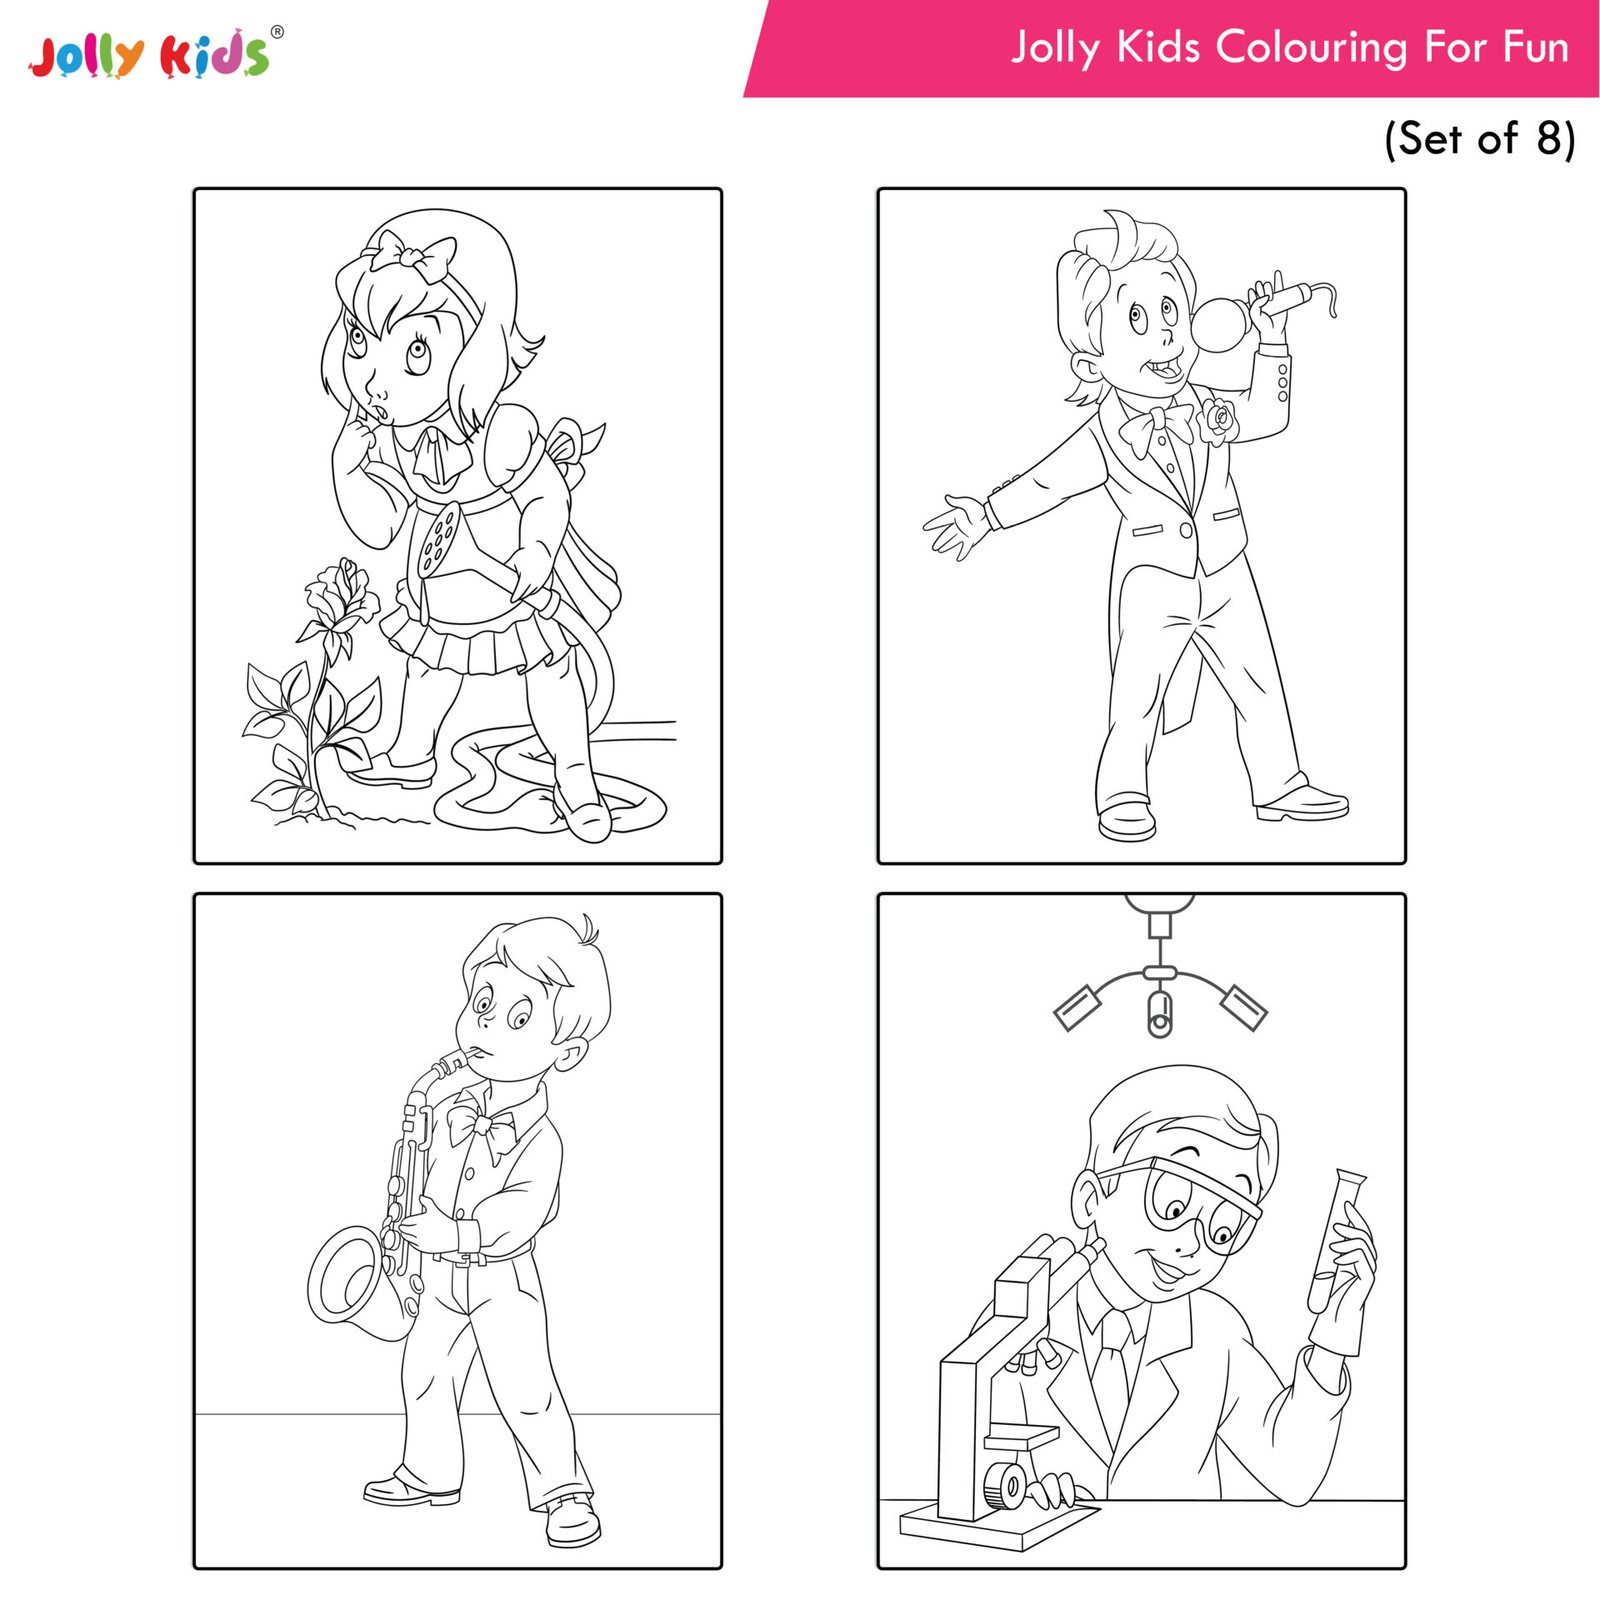 Jolly Kids Colouring For Fun Book Set of 8 8